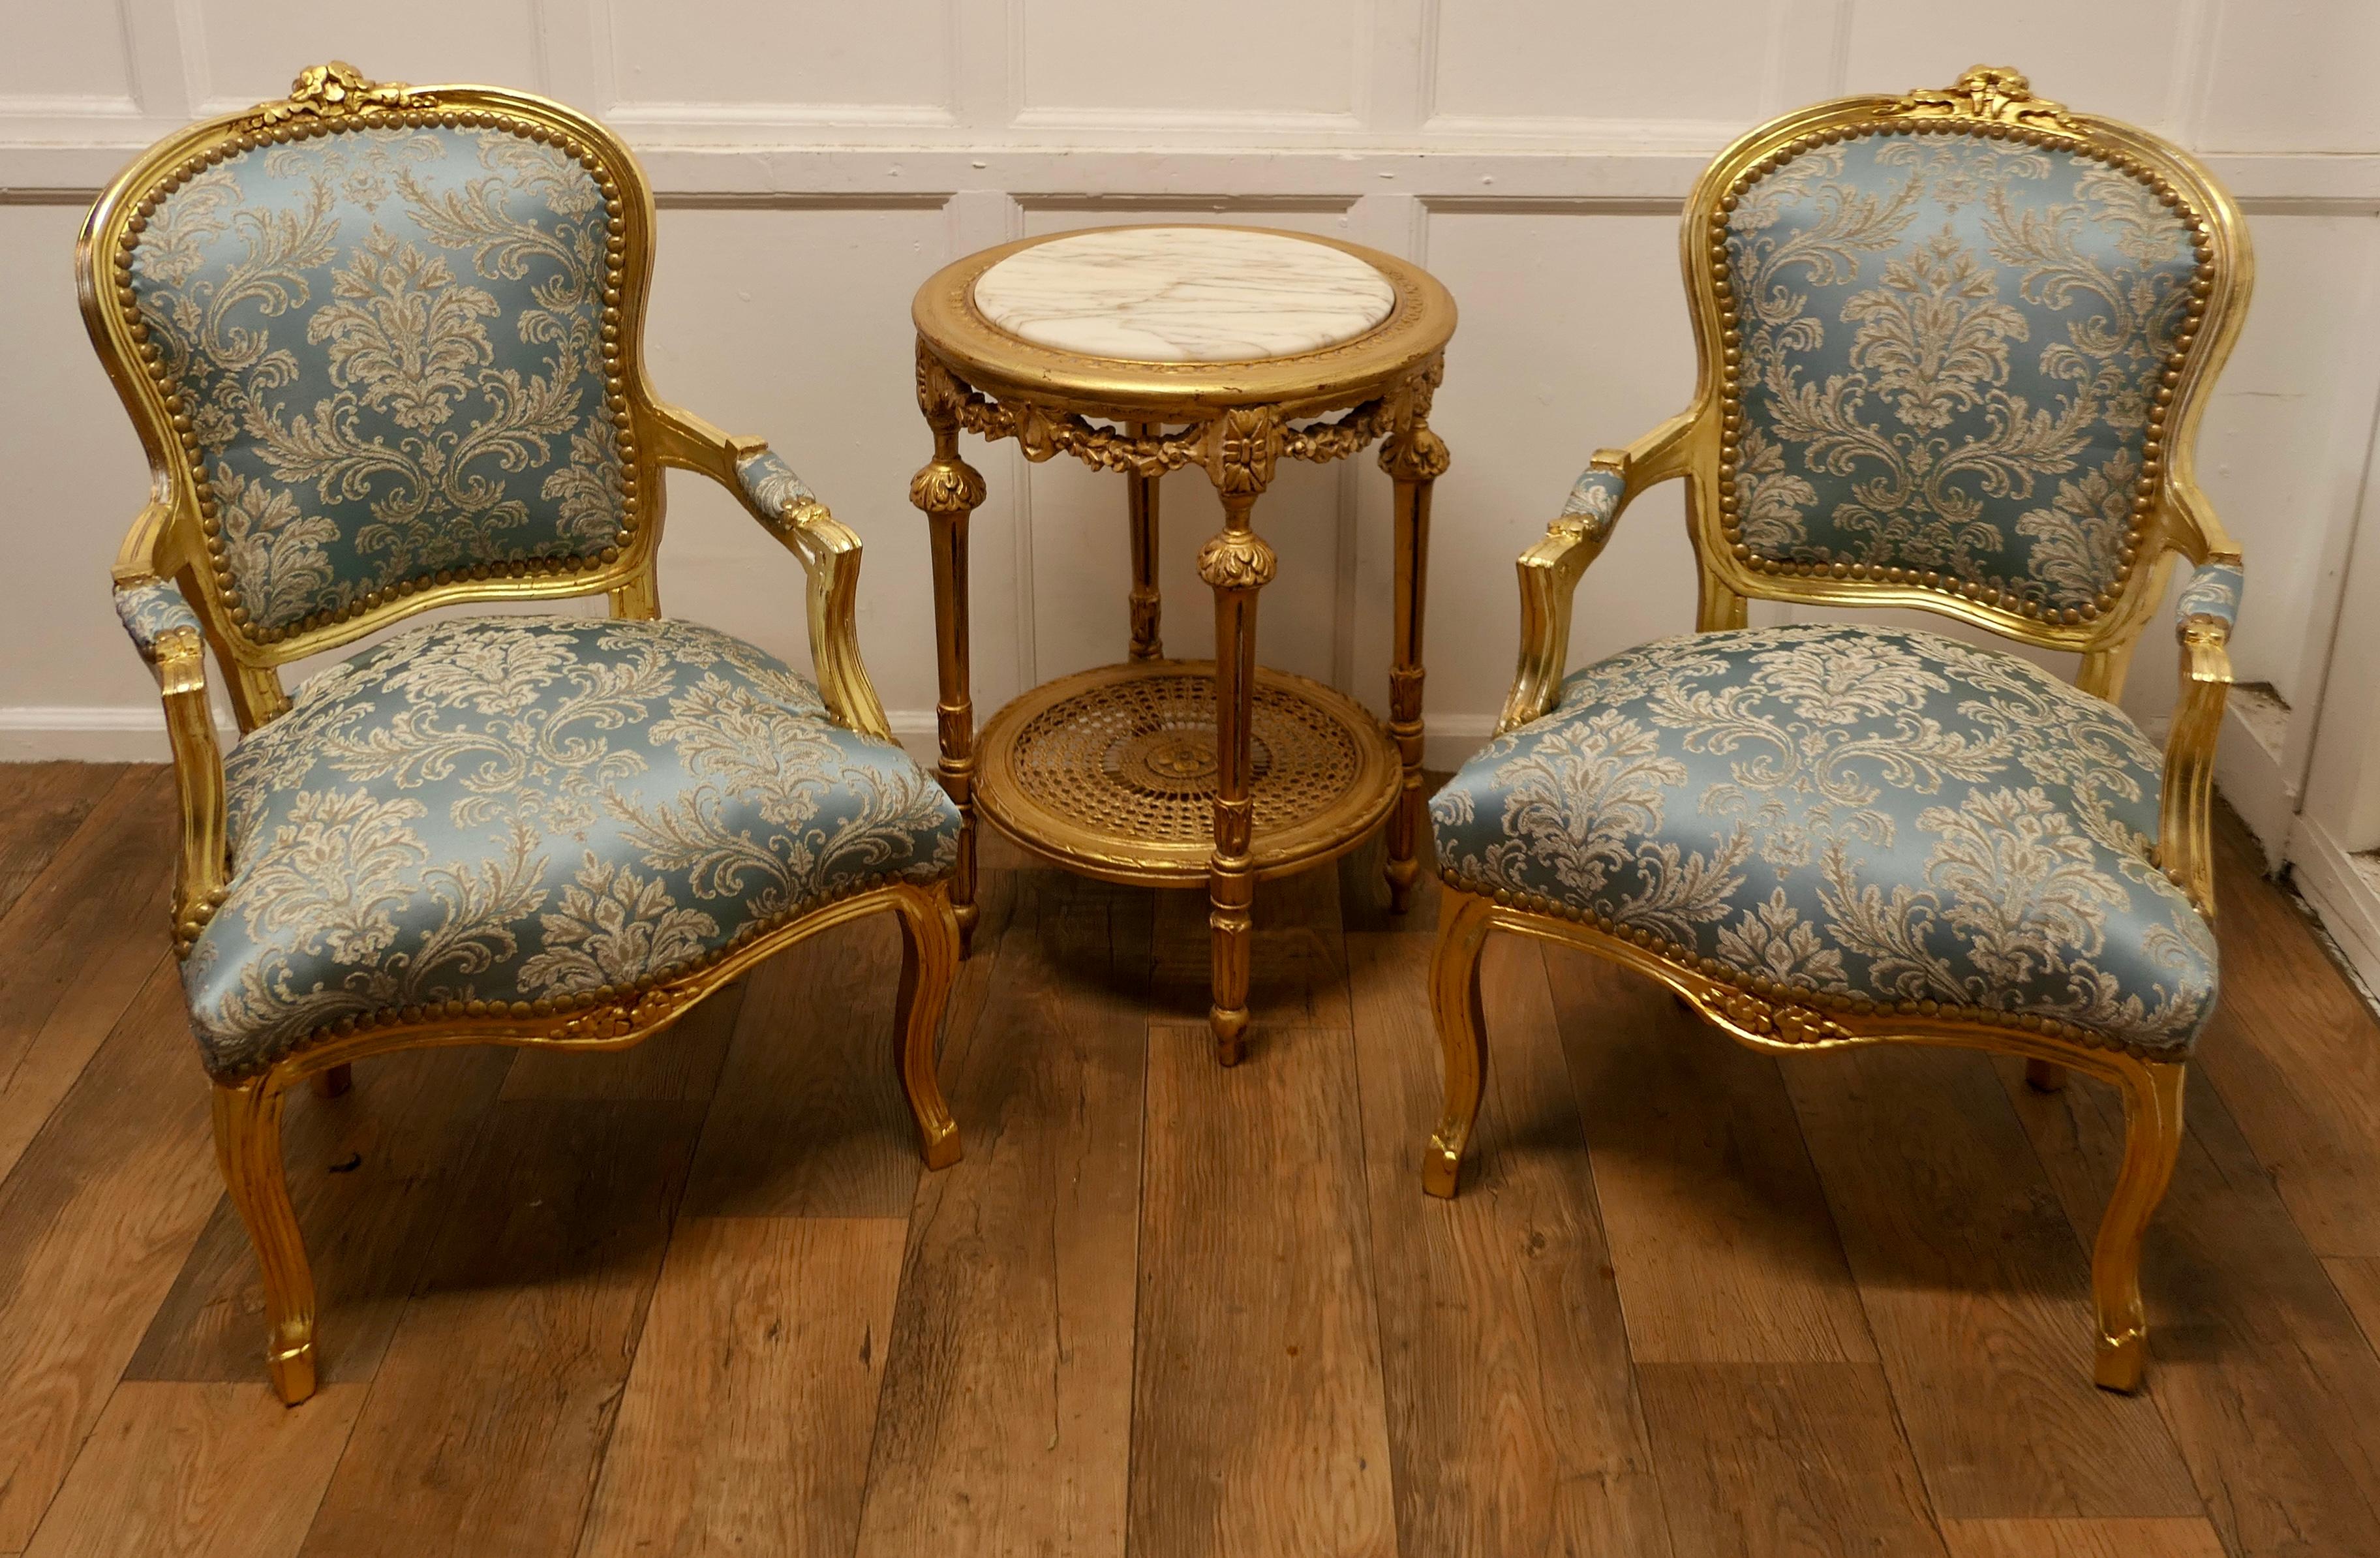 French Provincial A Superb Pair of French 19th Century Gilt Salon Chairs   